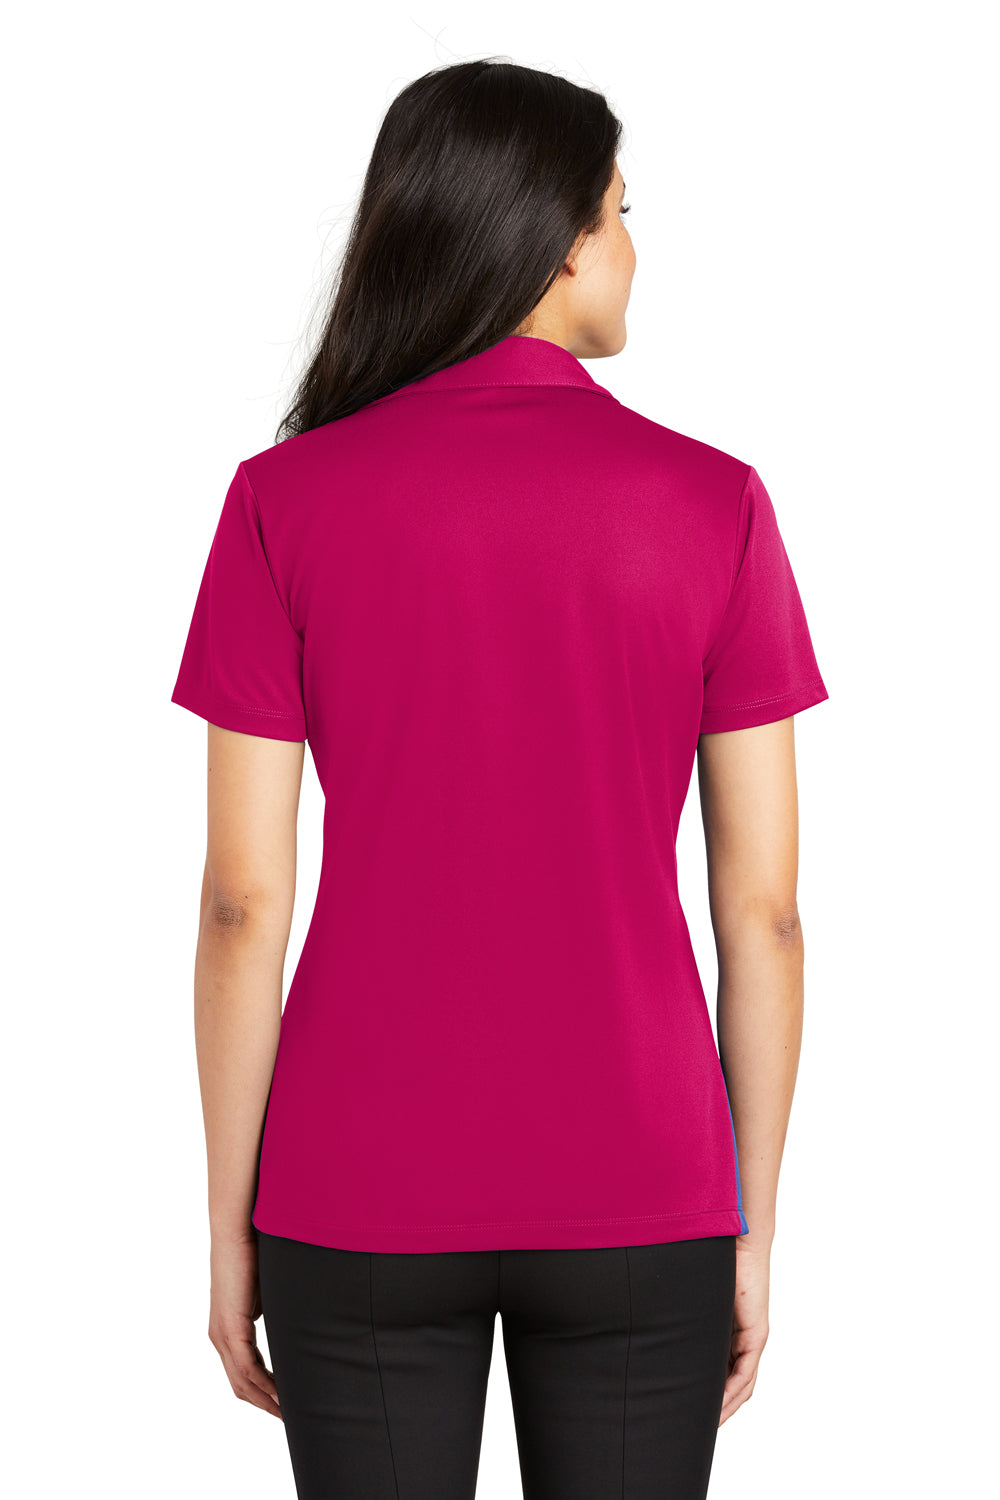 Port Authority L540 Womens Silk Touch Performance Moisture Wicking Short Sleeve Polo Shirt Raspberry Pink Back